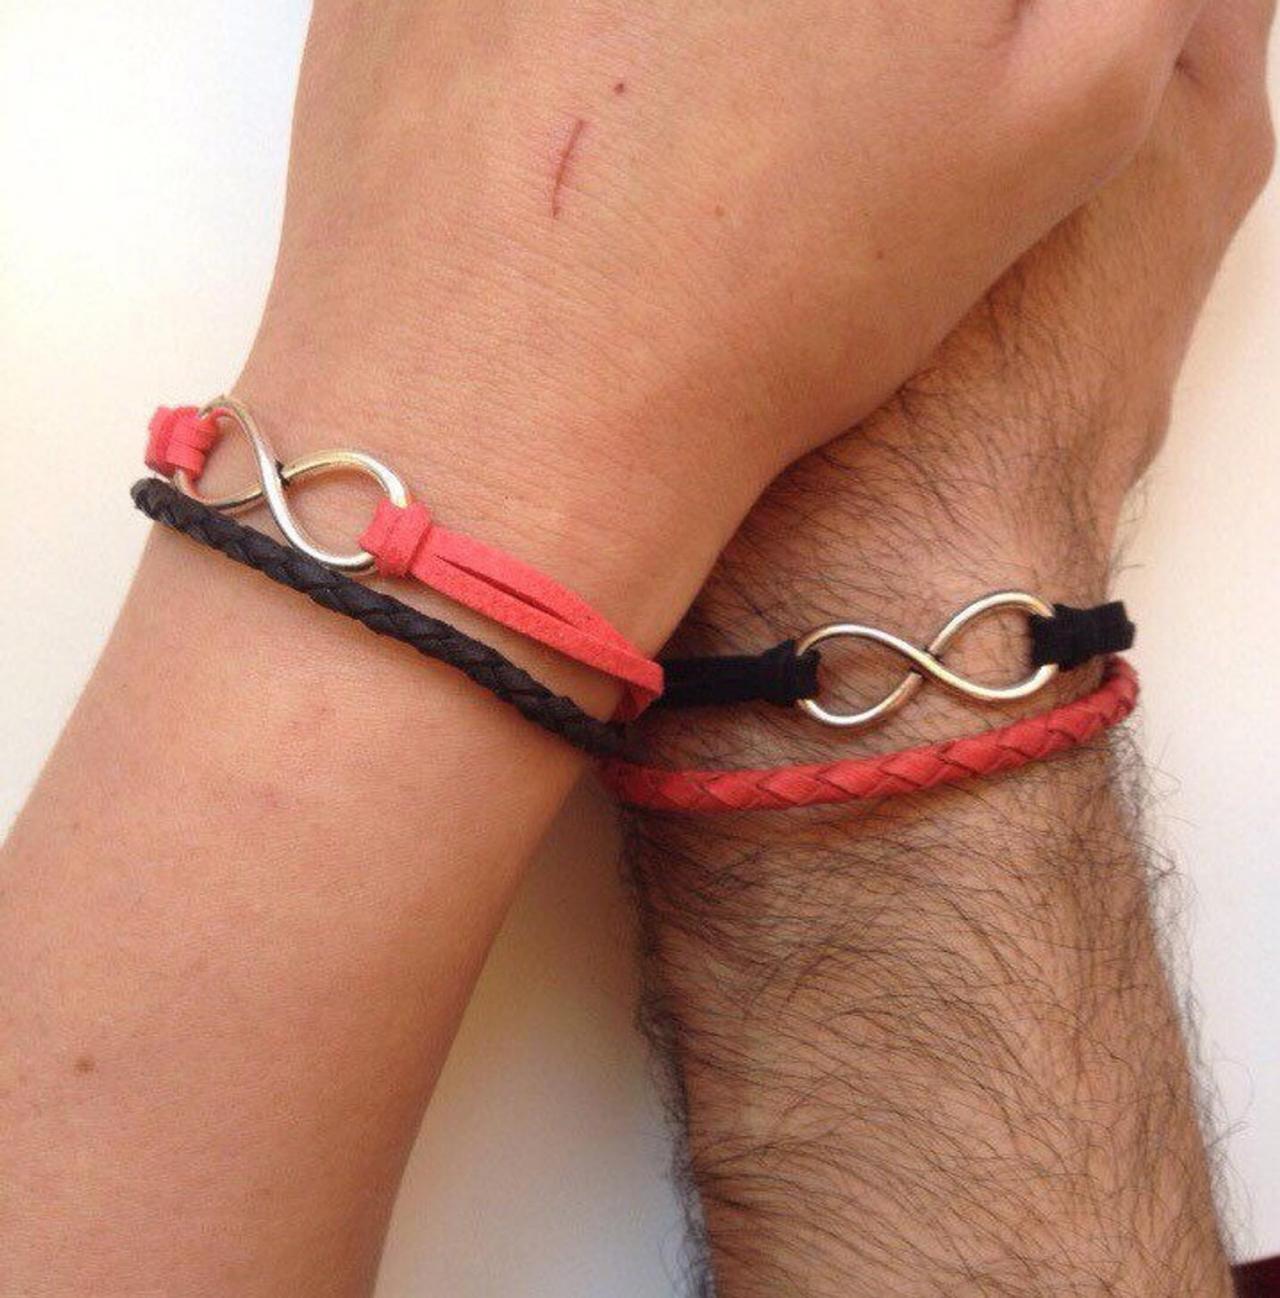 Couples Men Women Bracelets 168- Couple Jewelry, Friendship Love Cuff Infinity Ying And Yang Bracelet Leather Braid Gift Adjustable Current